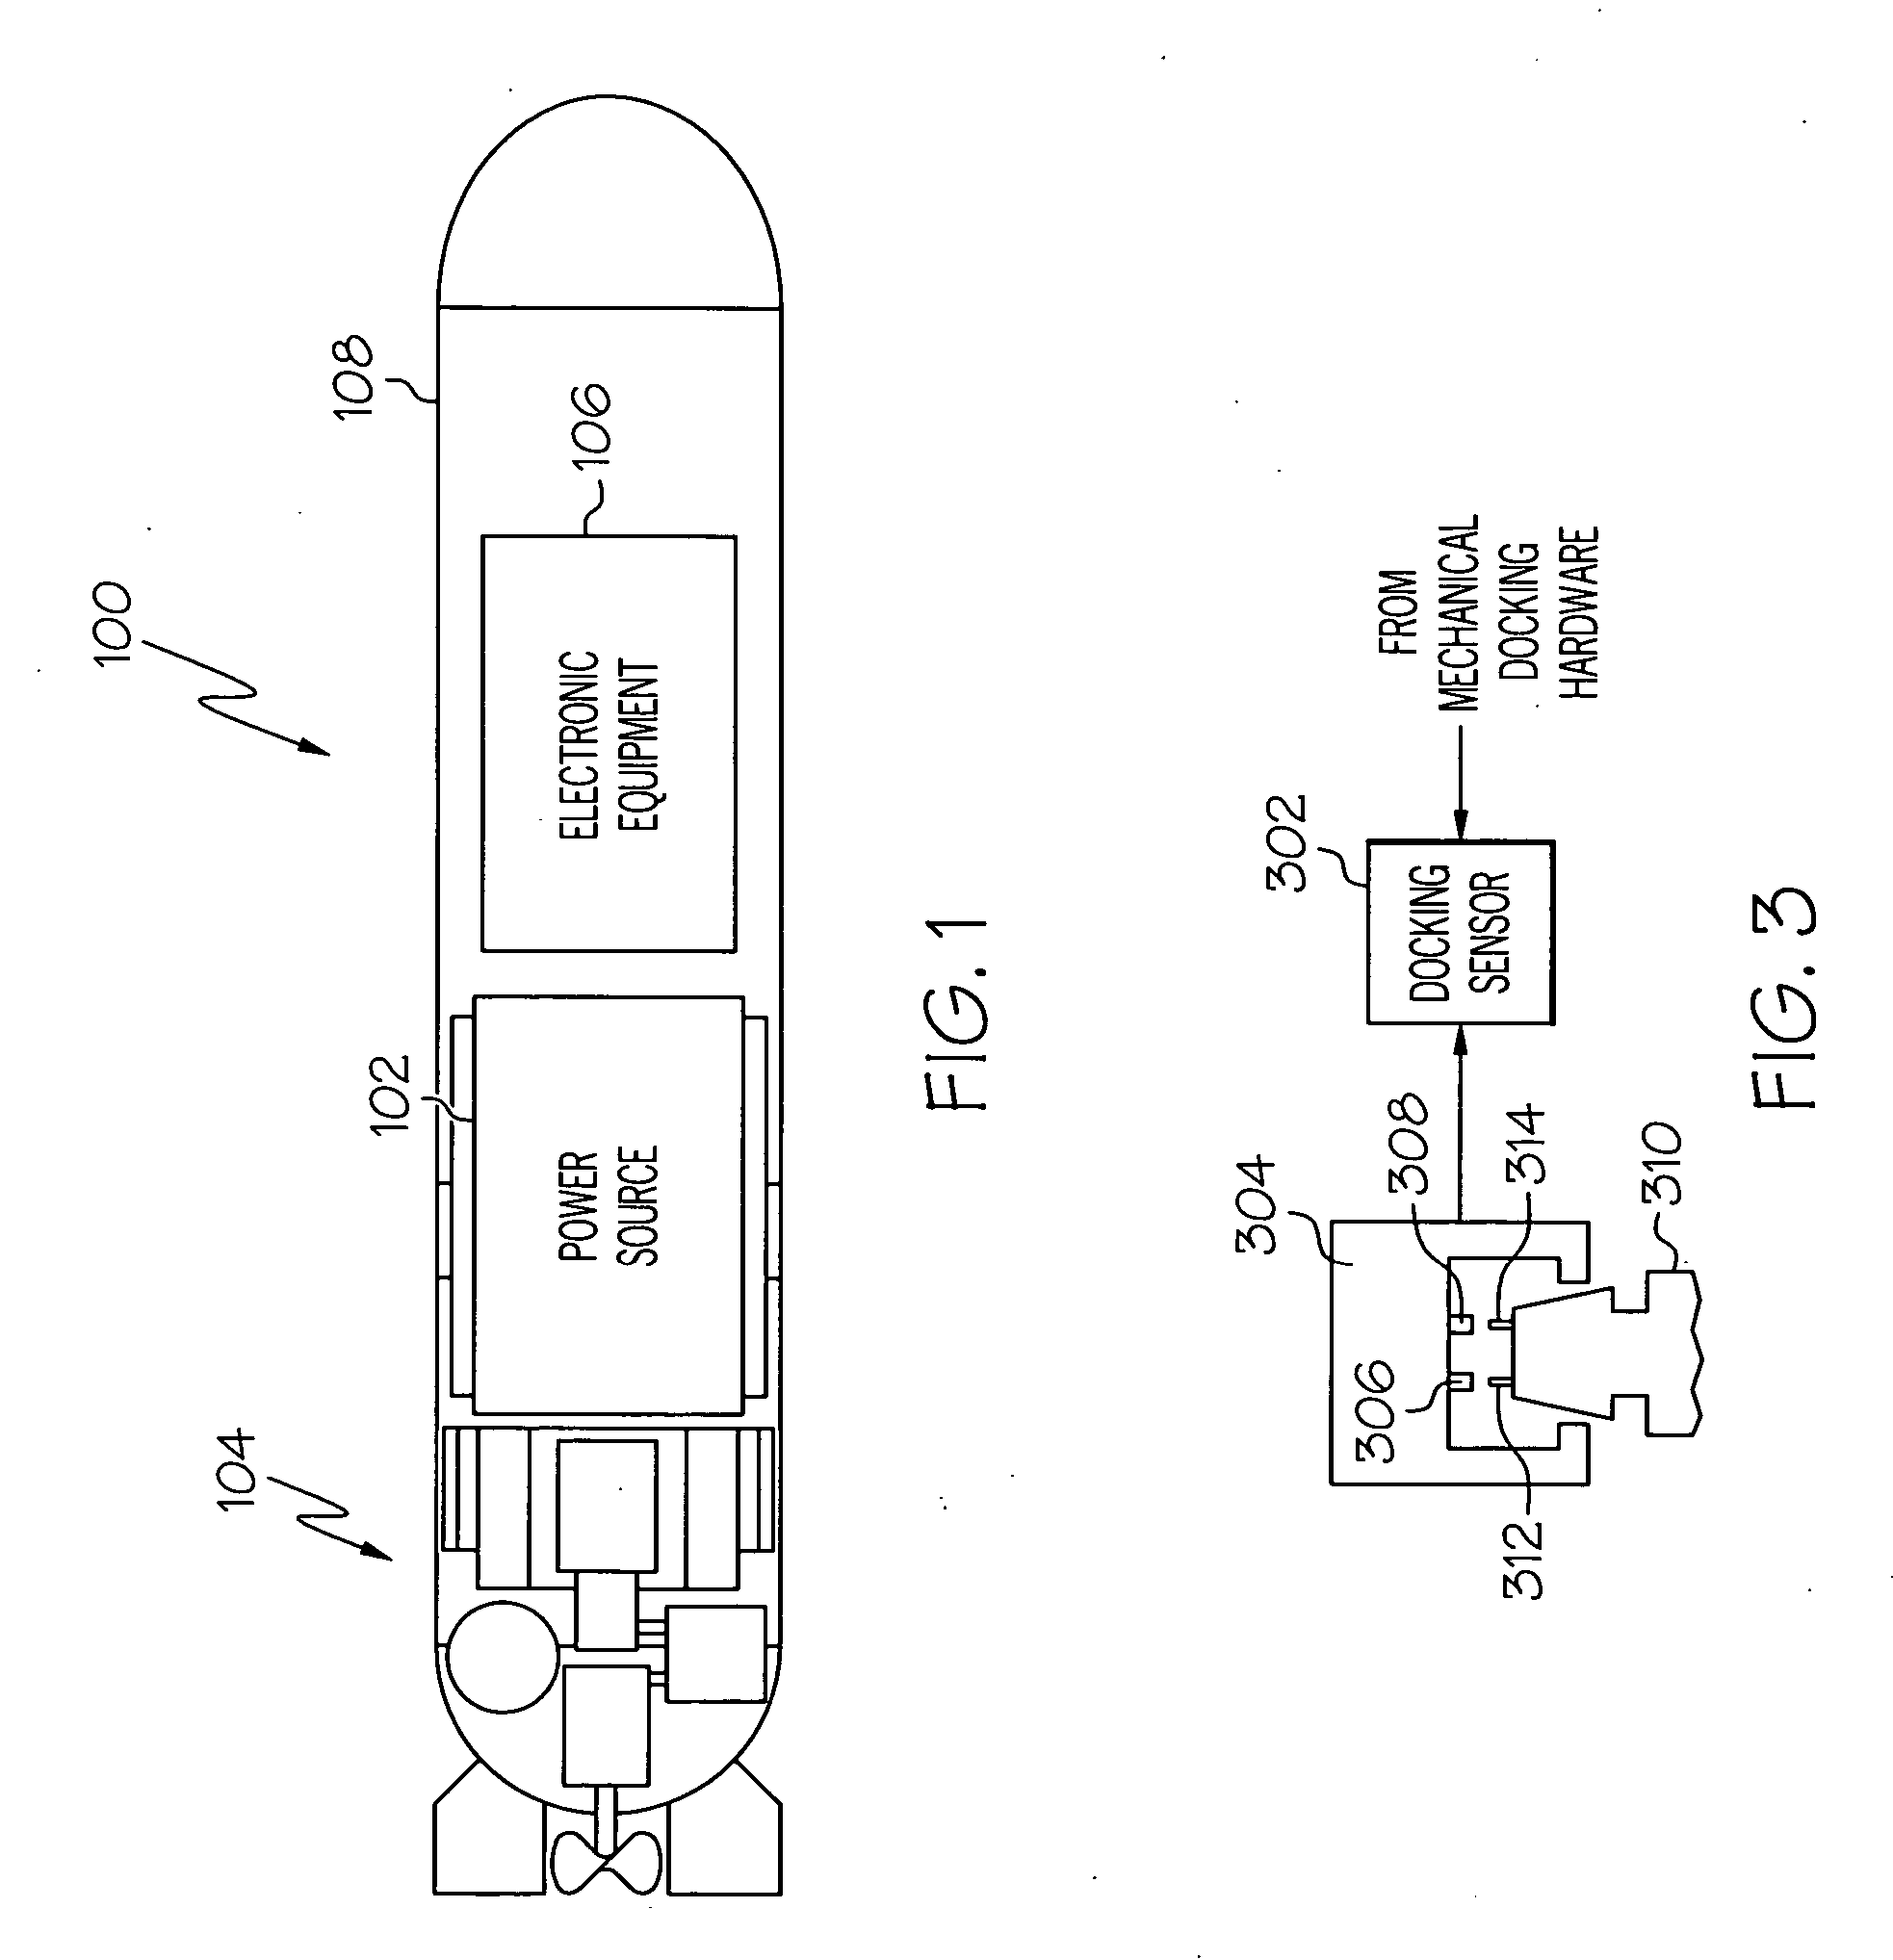 Unmanned underwater vehicle turbine powered charging system and method